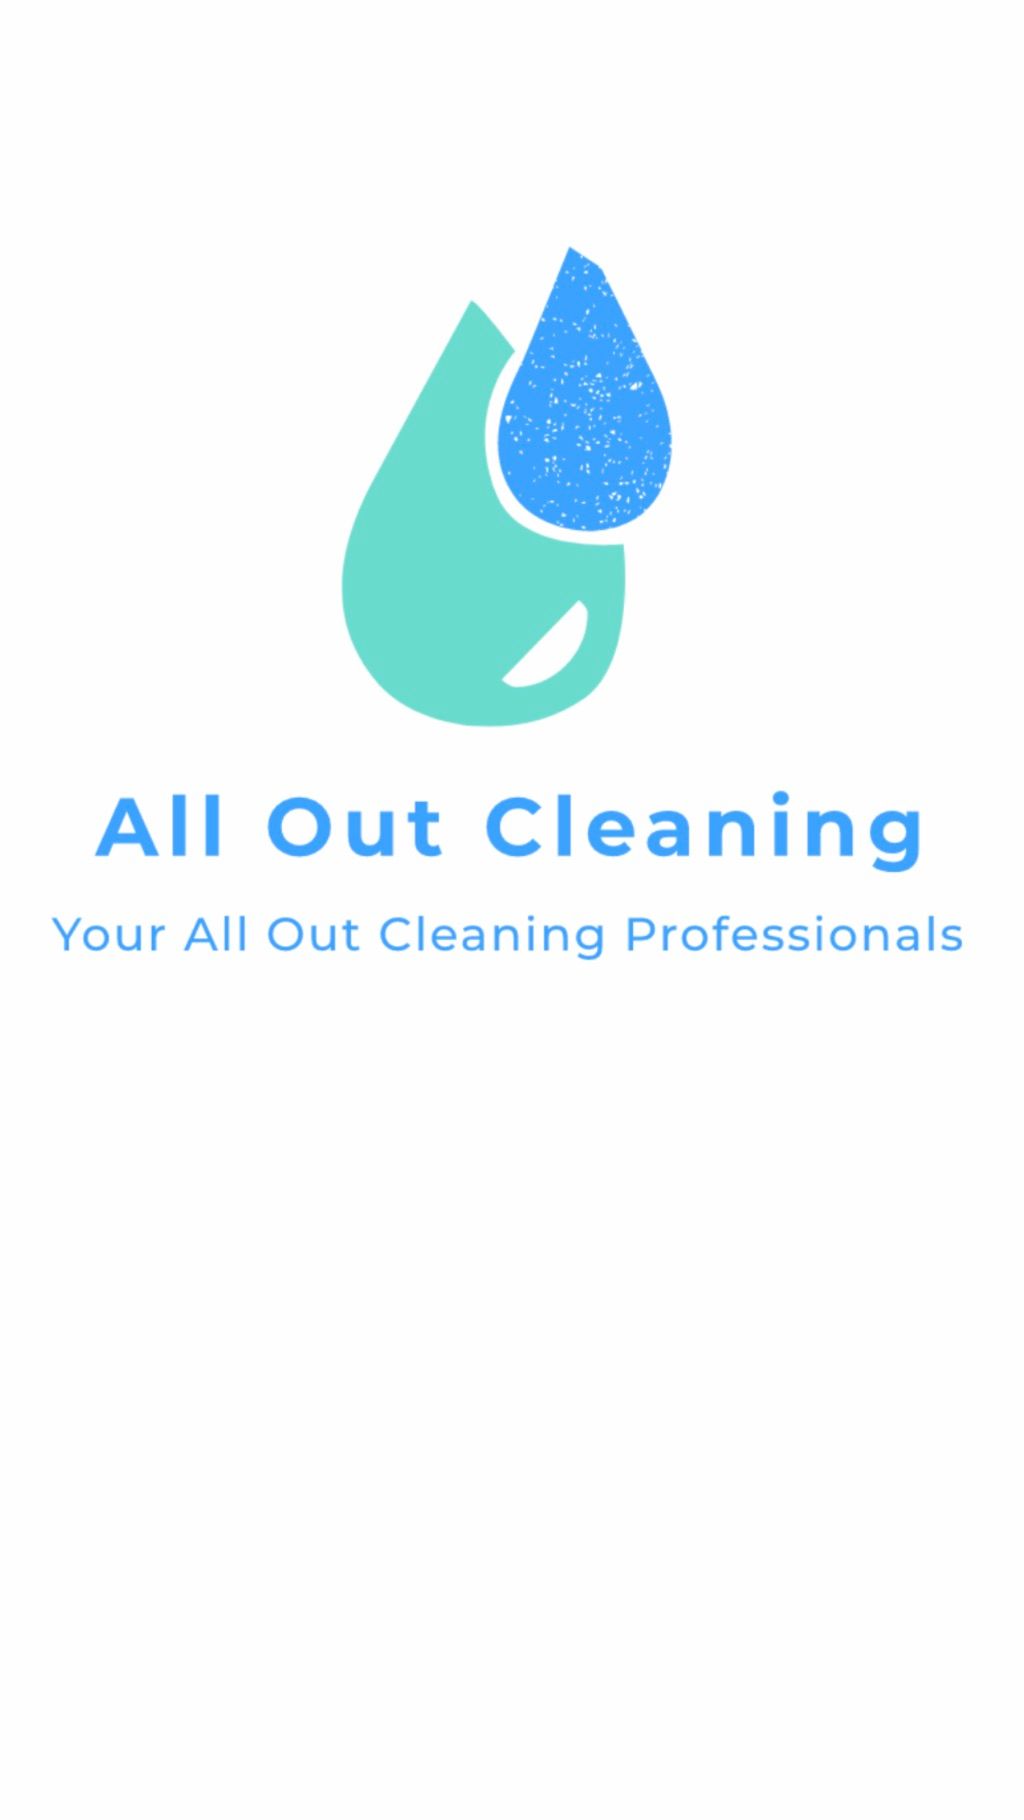 All out cleaning